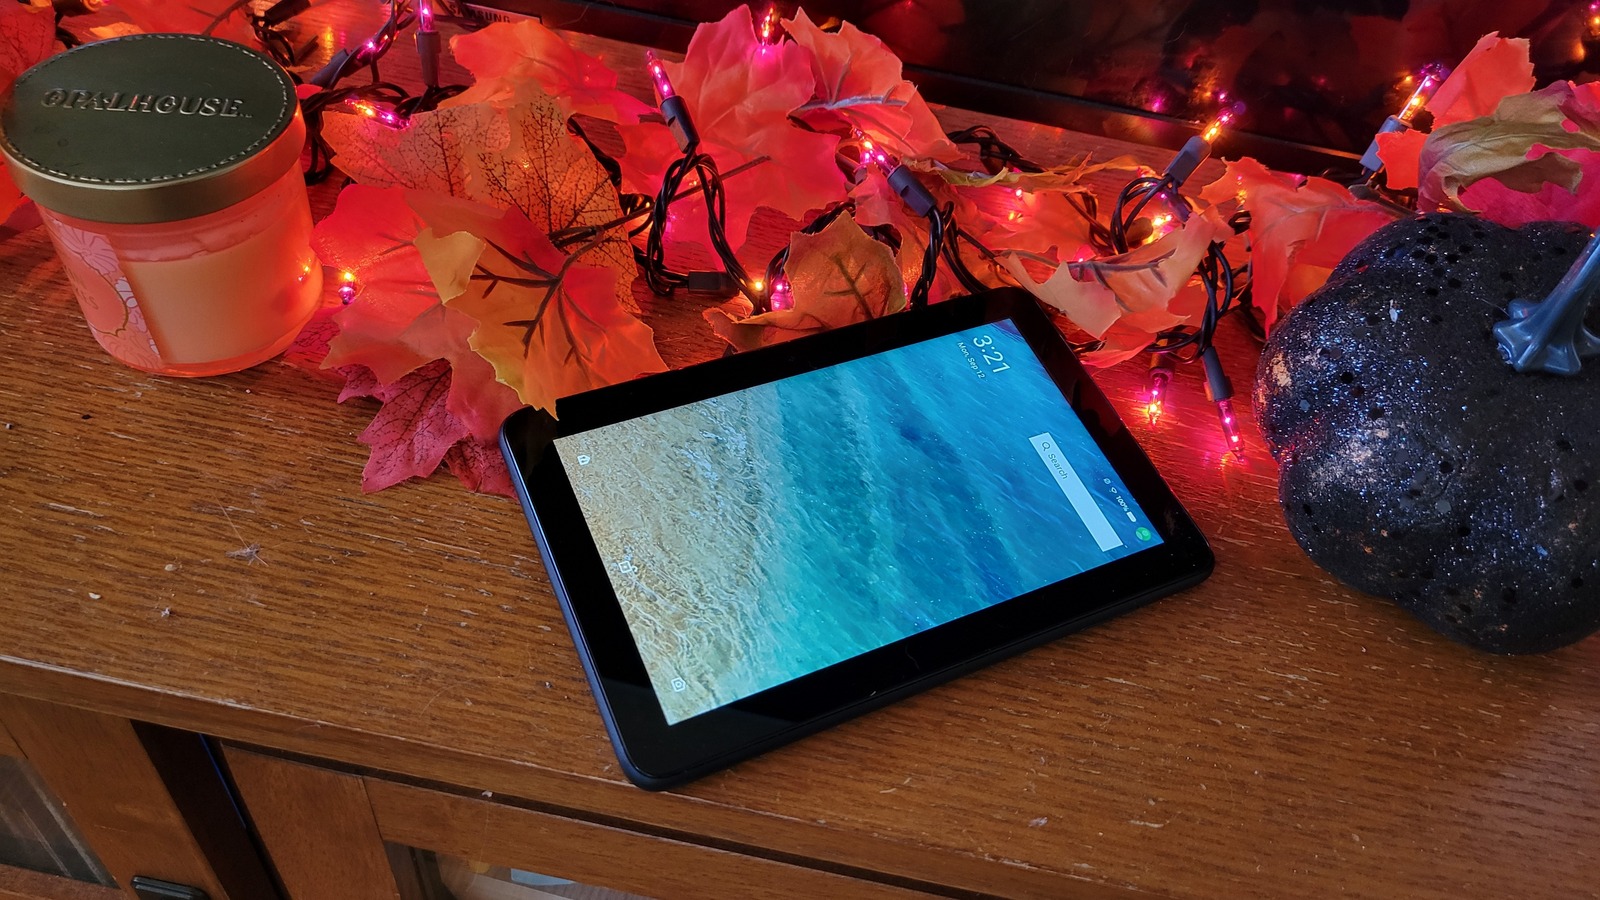 The  Fire 7 Tablet: You Get What You Pay For